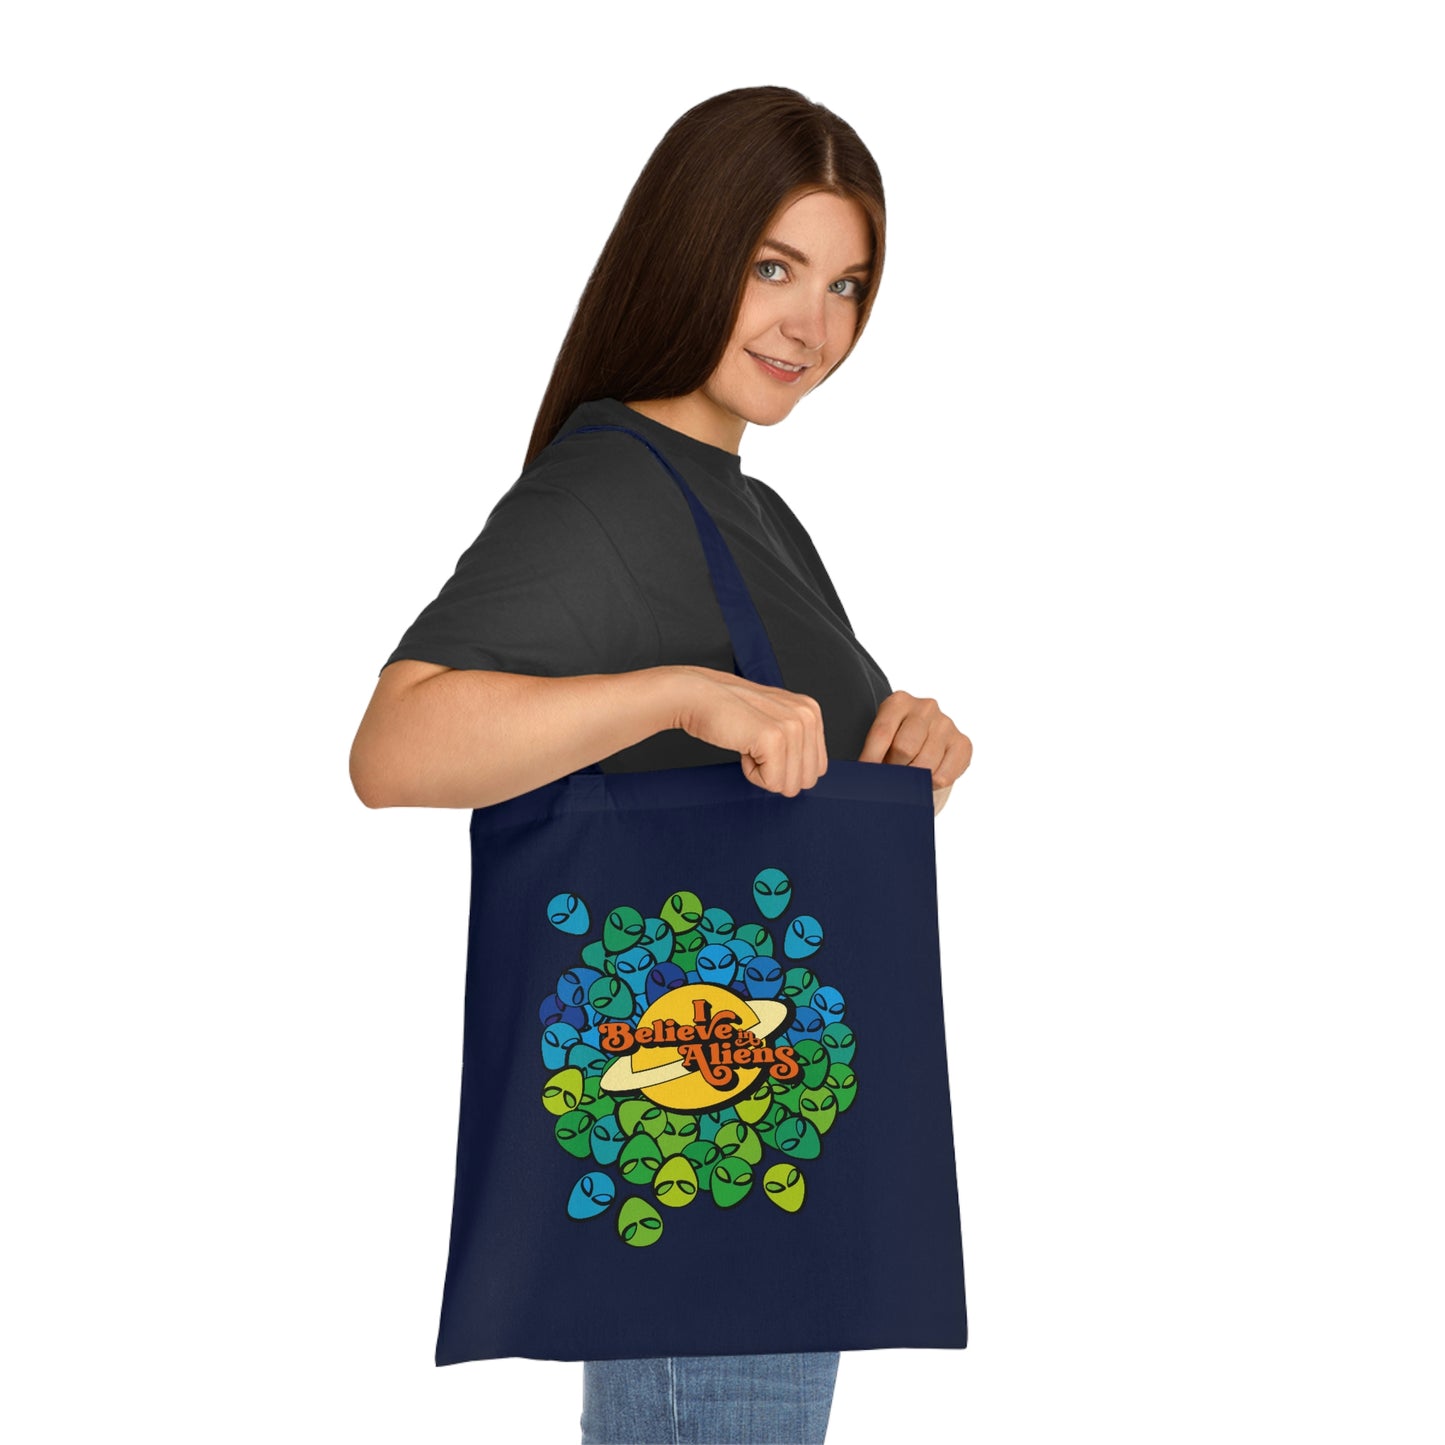 Weirdo | Cotton tote bag for you weirdos who believe Aliens are amongst us! Check out this awesome alien tote bag that is 100% cotton.